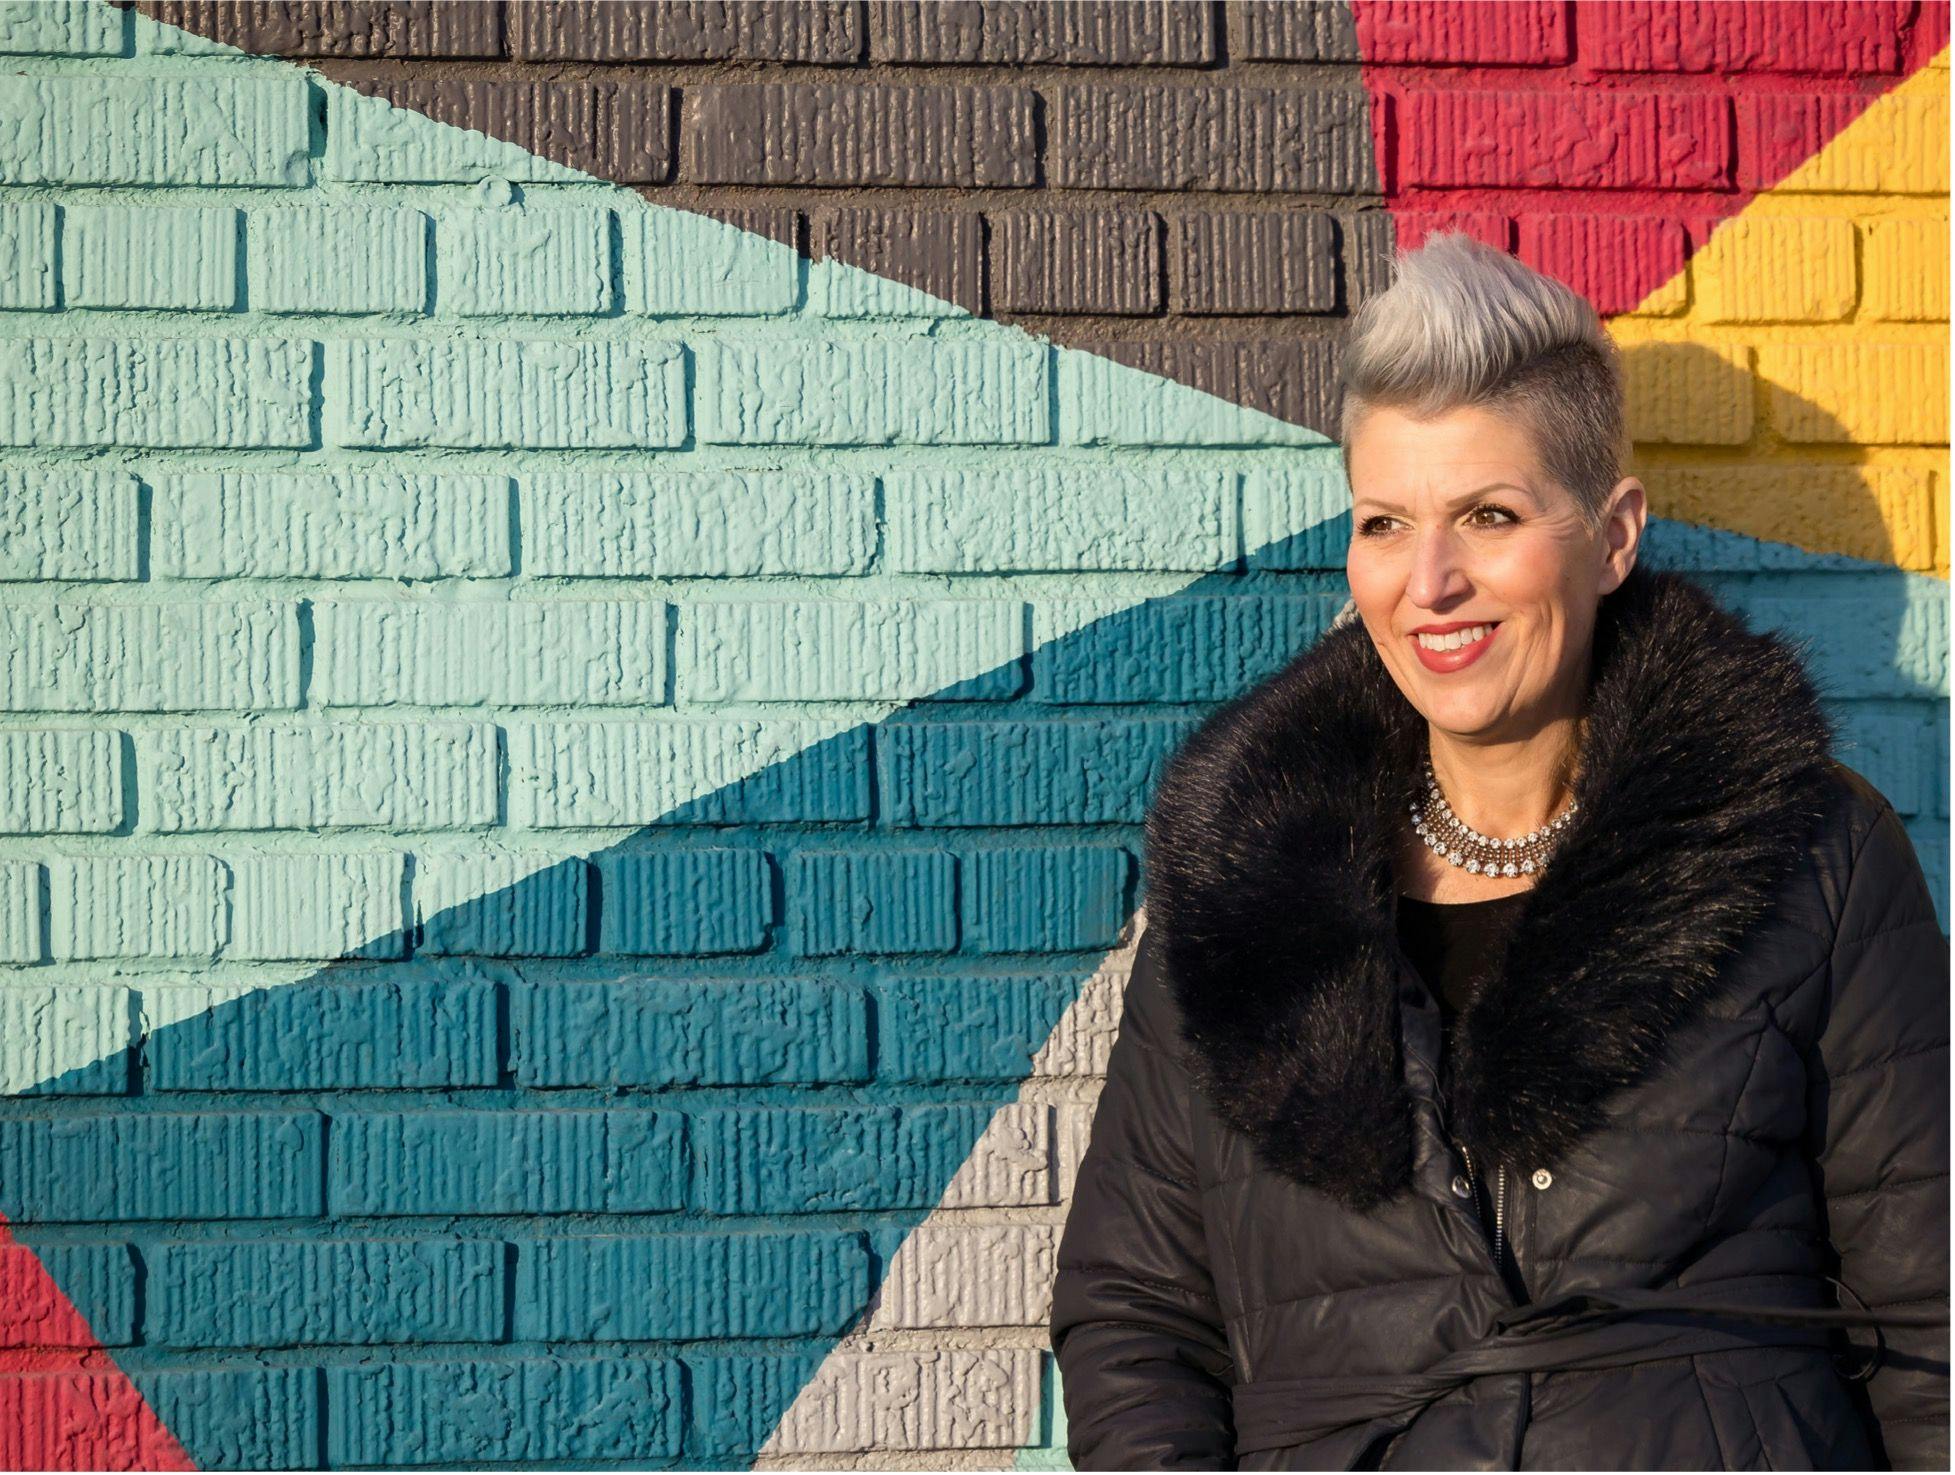 Patient advocate, Heather von St. James, standing in front of a colorful brick wall